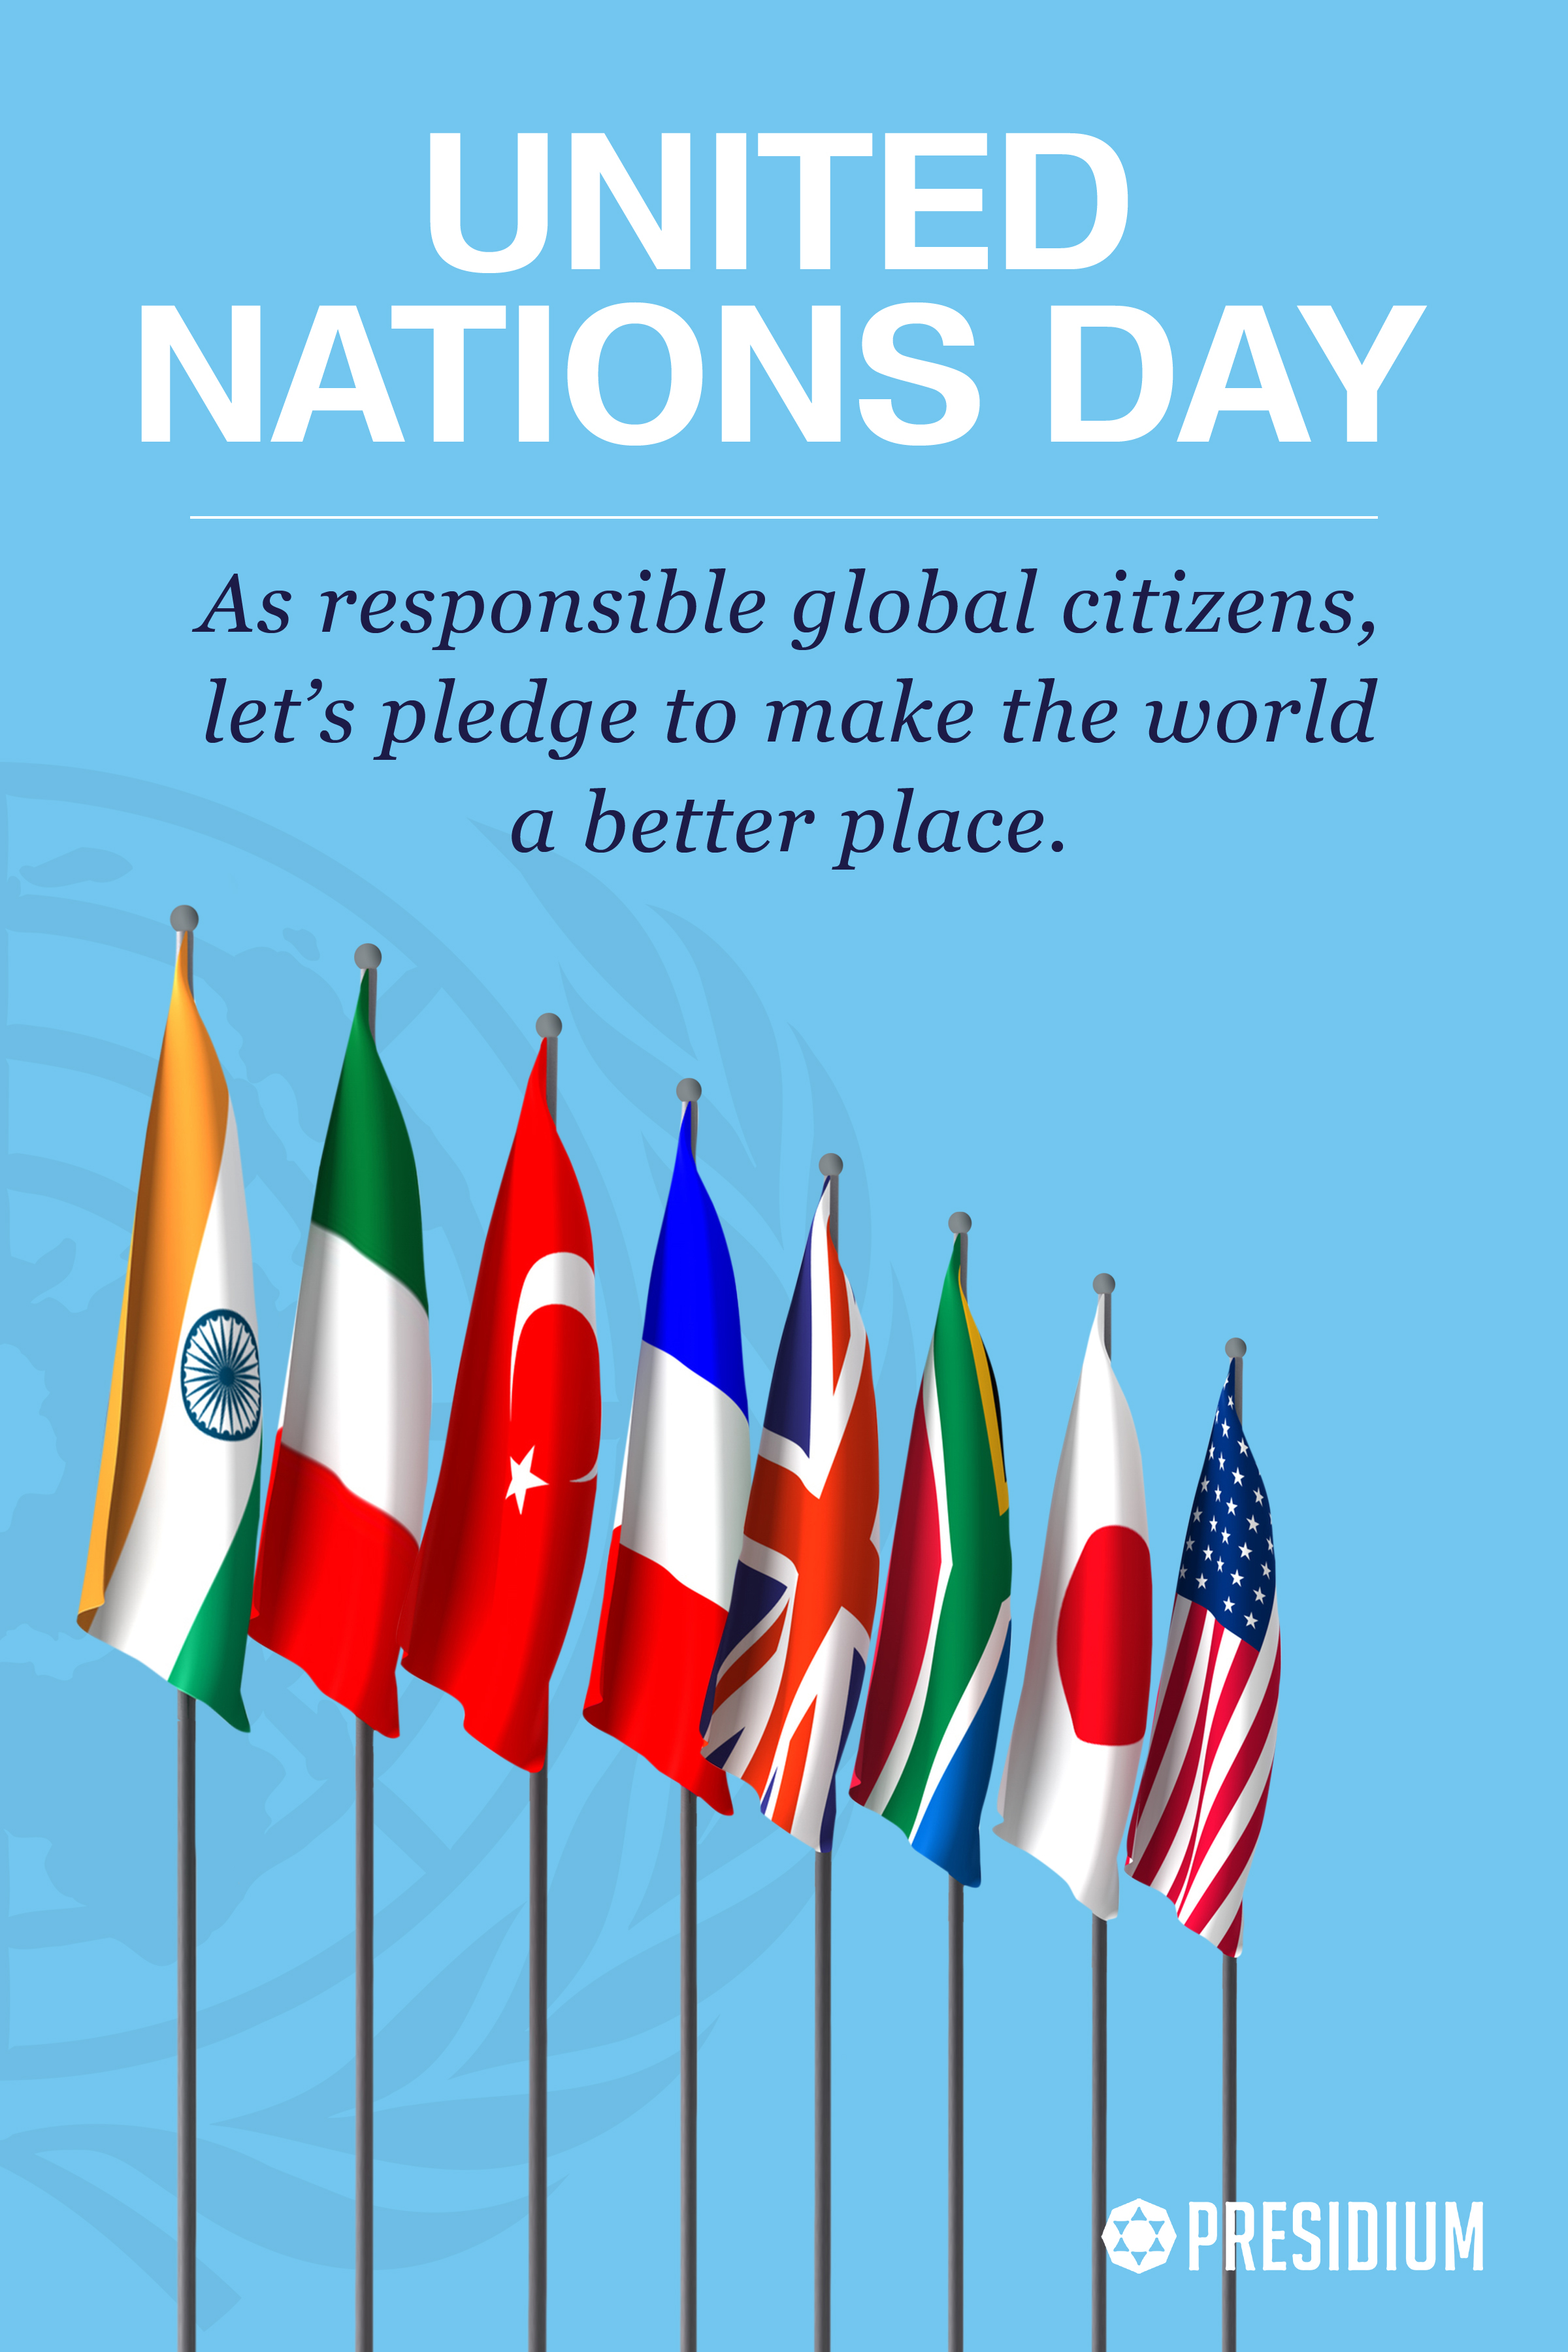 united nations day an responsible global citizens, let’s pledge to make the world a better place